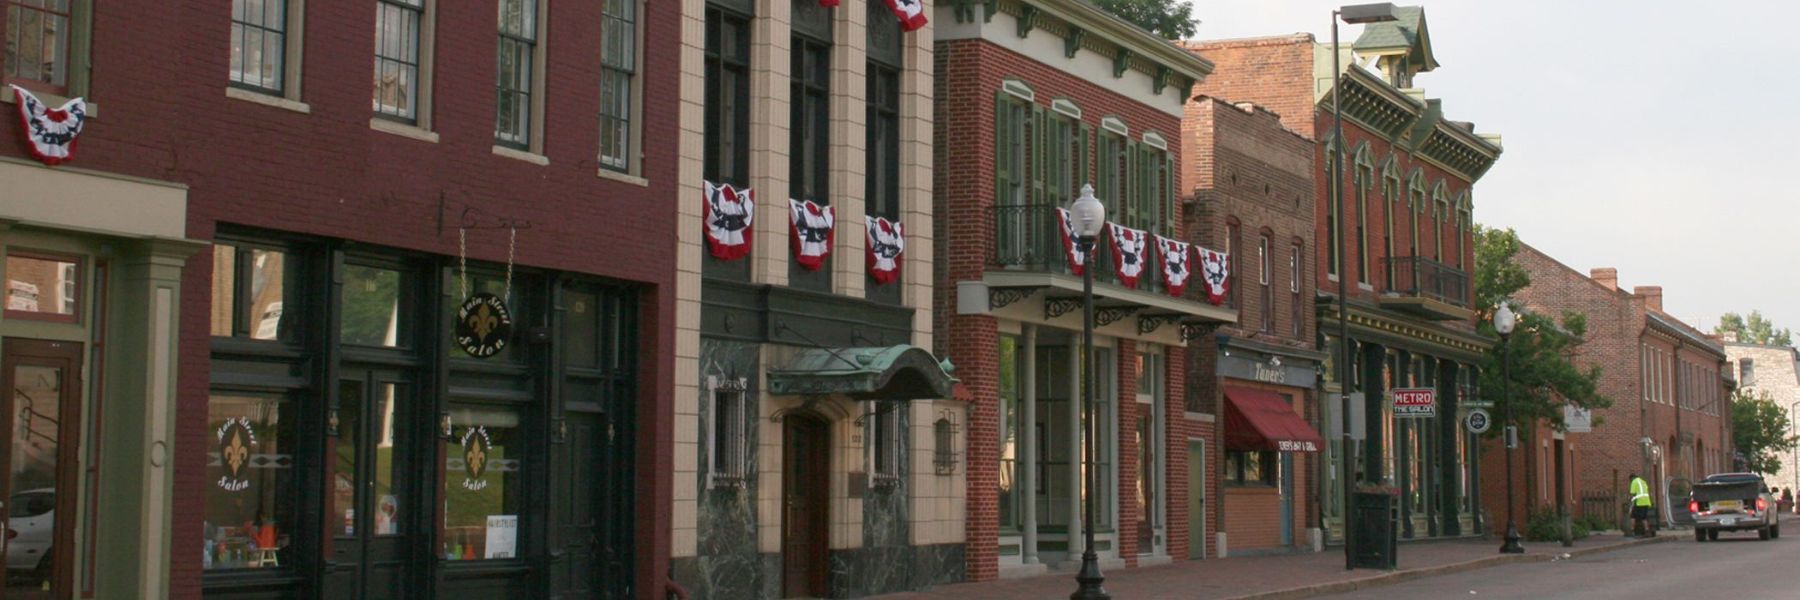 Historic Saint Charles makes for a perfect day trip from St. Louis.